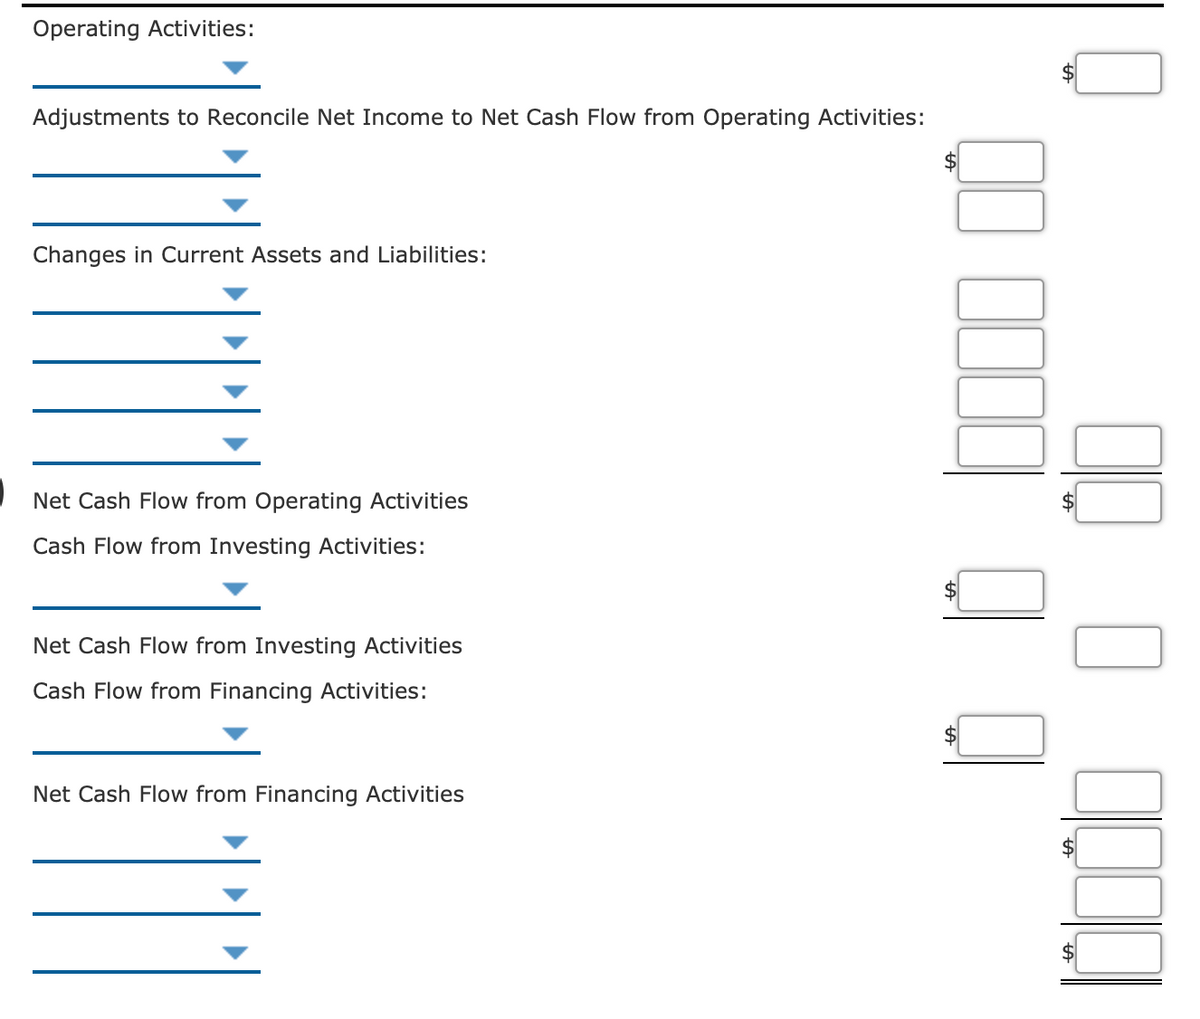 Operating Activities:
Adjustments to Reconcile Net Income to Net Cash Flow from Operating Activities:
Changes in Current Assets and Liabilities:
Net Cash Flow from Operating Activities
Cash Flow from Investing Activities:
Net Cash Flow from Investing Activities
Cash Flow from Financing Activities:
Net Cash Flow from Financing Activities
